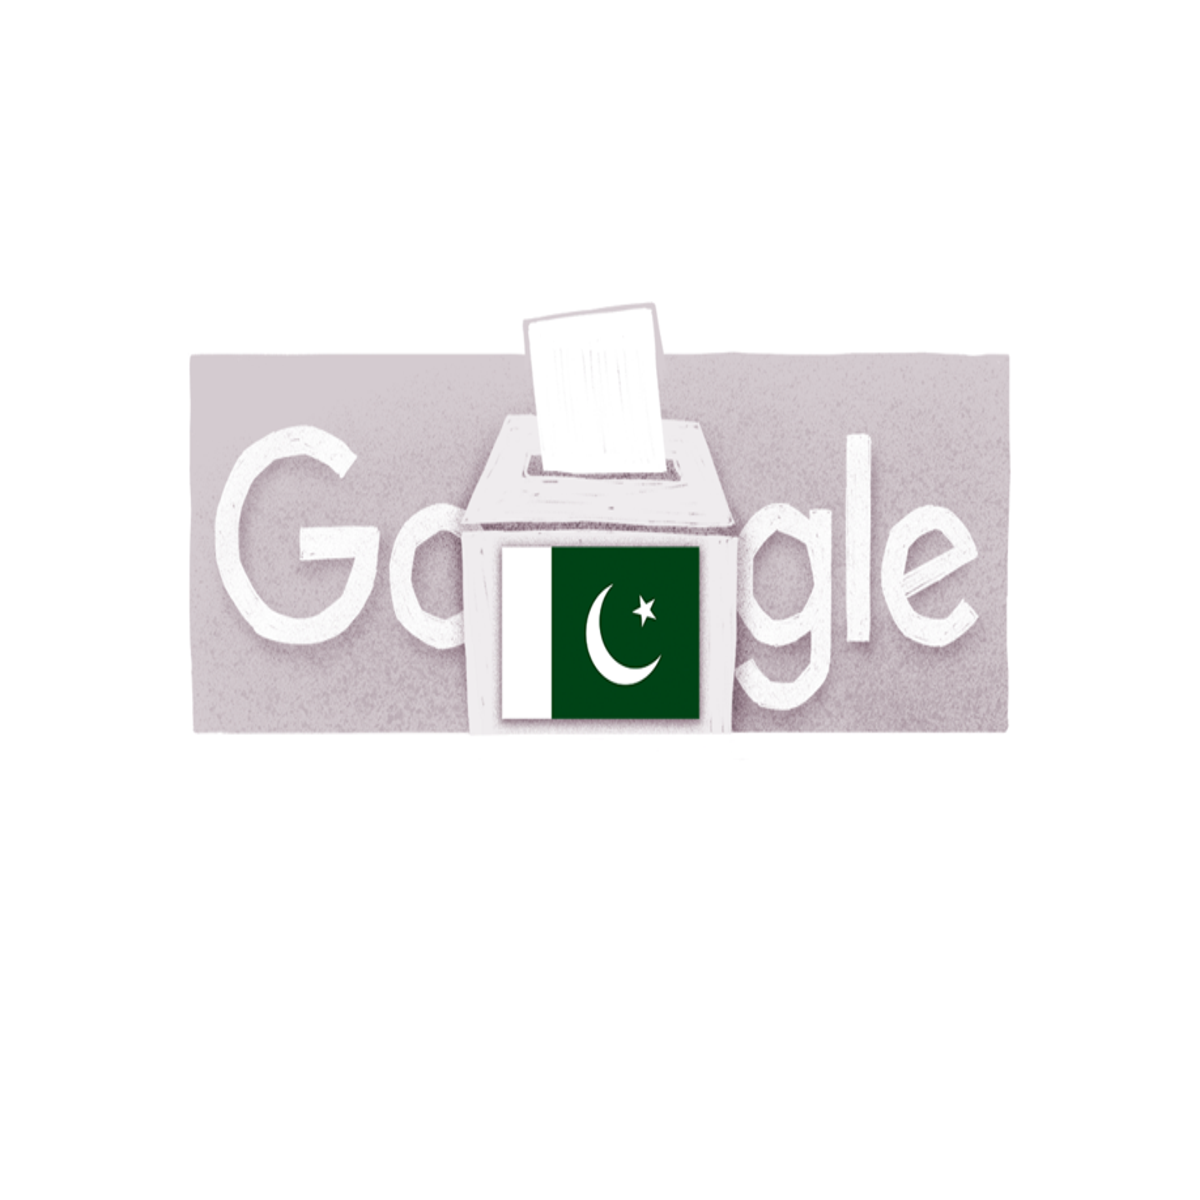 Pakistan flag 'the best toilet paper in the world' according to Google -  The Week